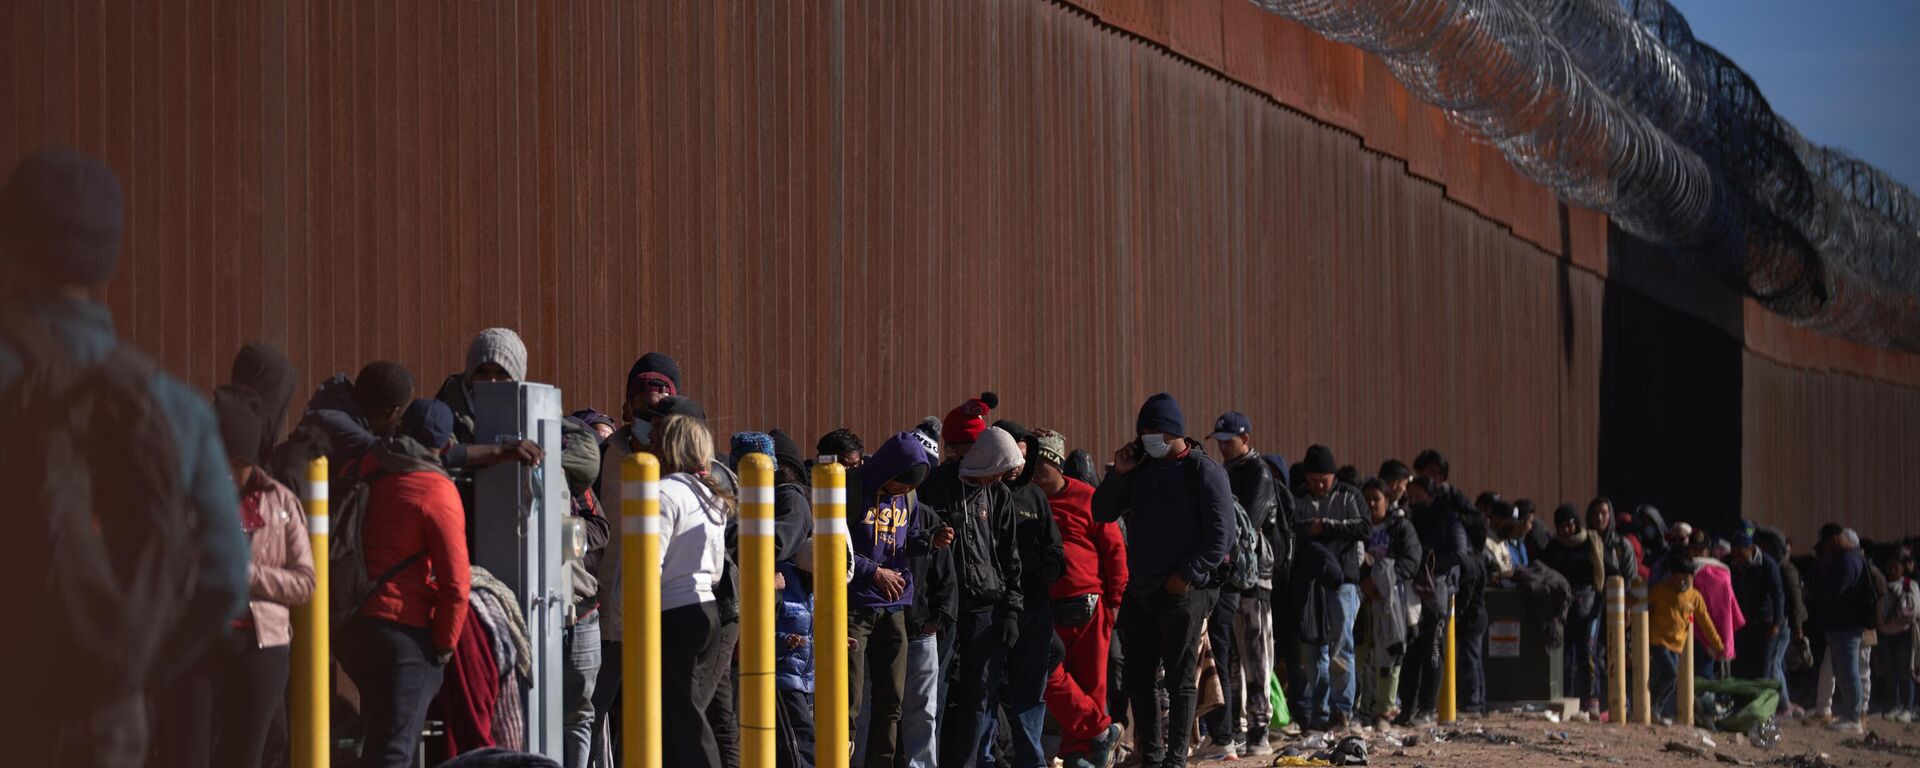 Hundreds of migrants line up to be processed by US Border Patrol under the Stanton Street Bridge after illegally entering the US, in El Paso, Texas, on December 22, 2022 - Sputnik International, 1920, 10.01.2023